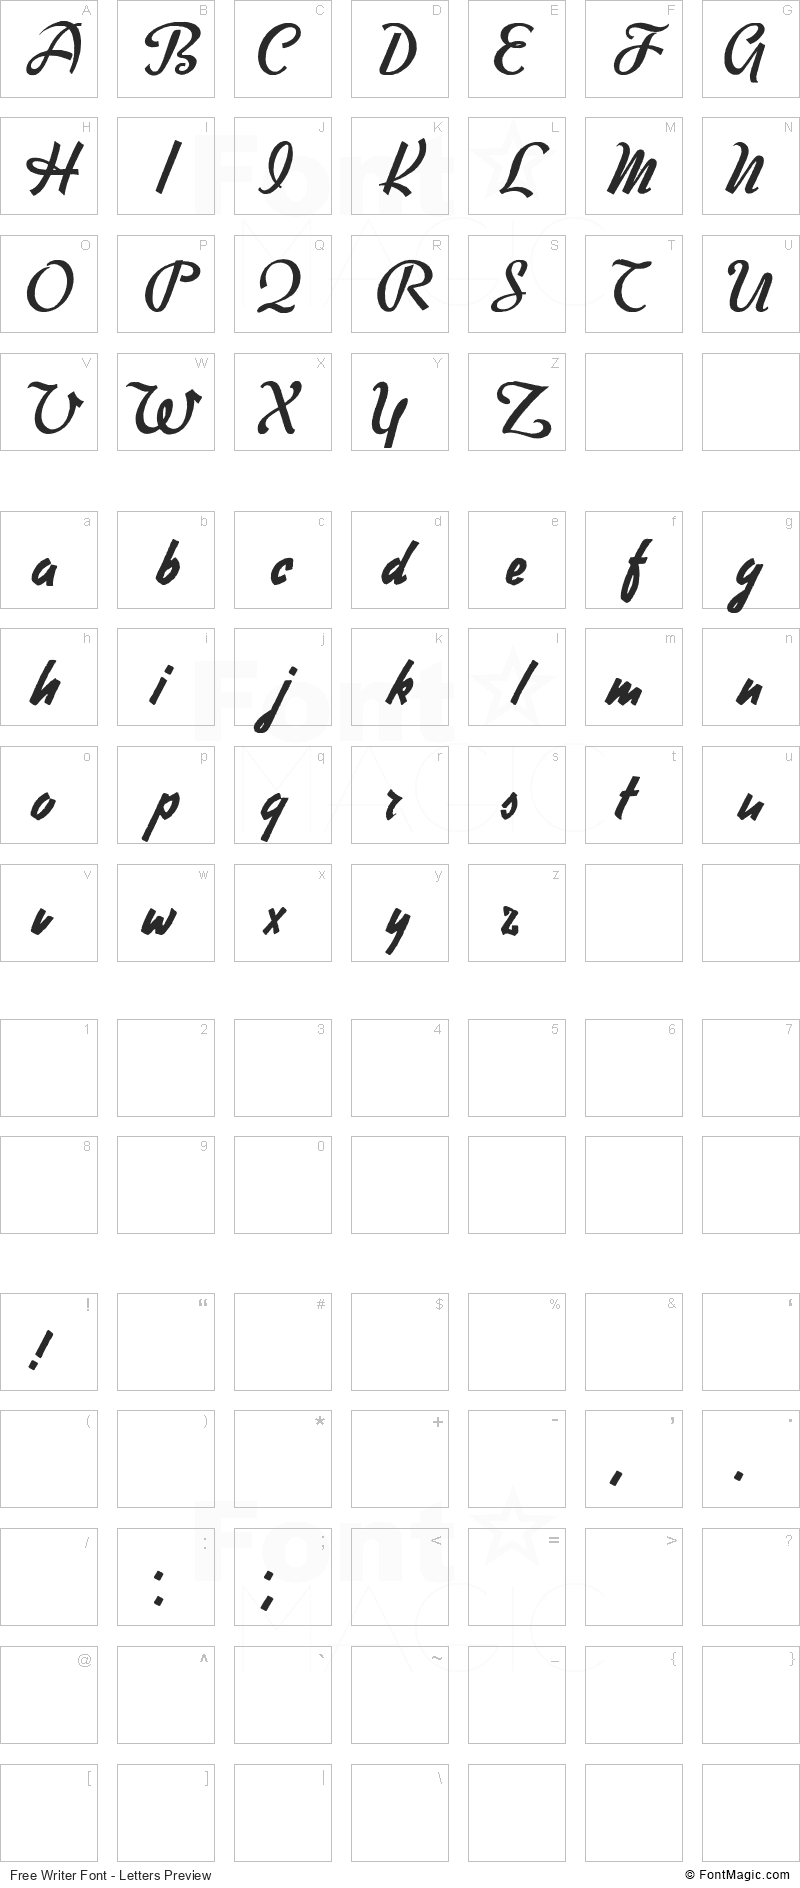 Free Writer Font - All Latters Preview Chart